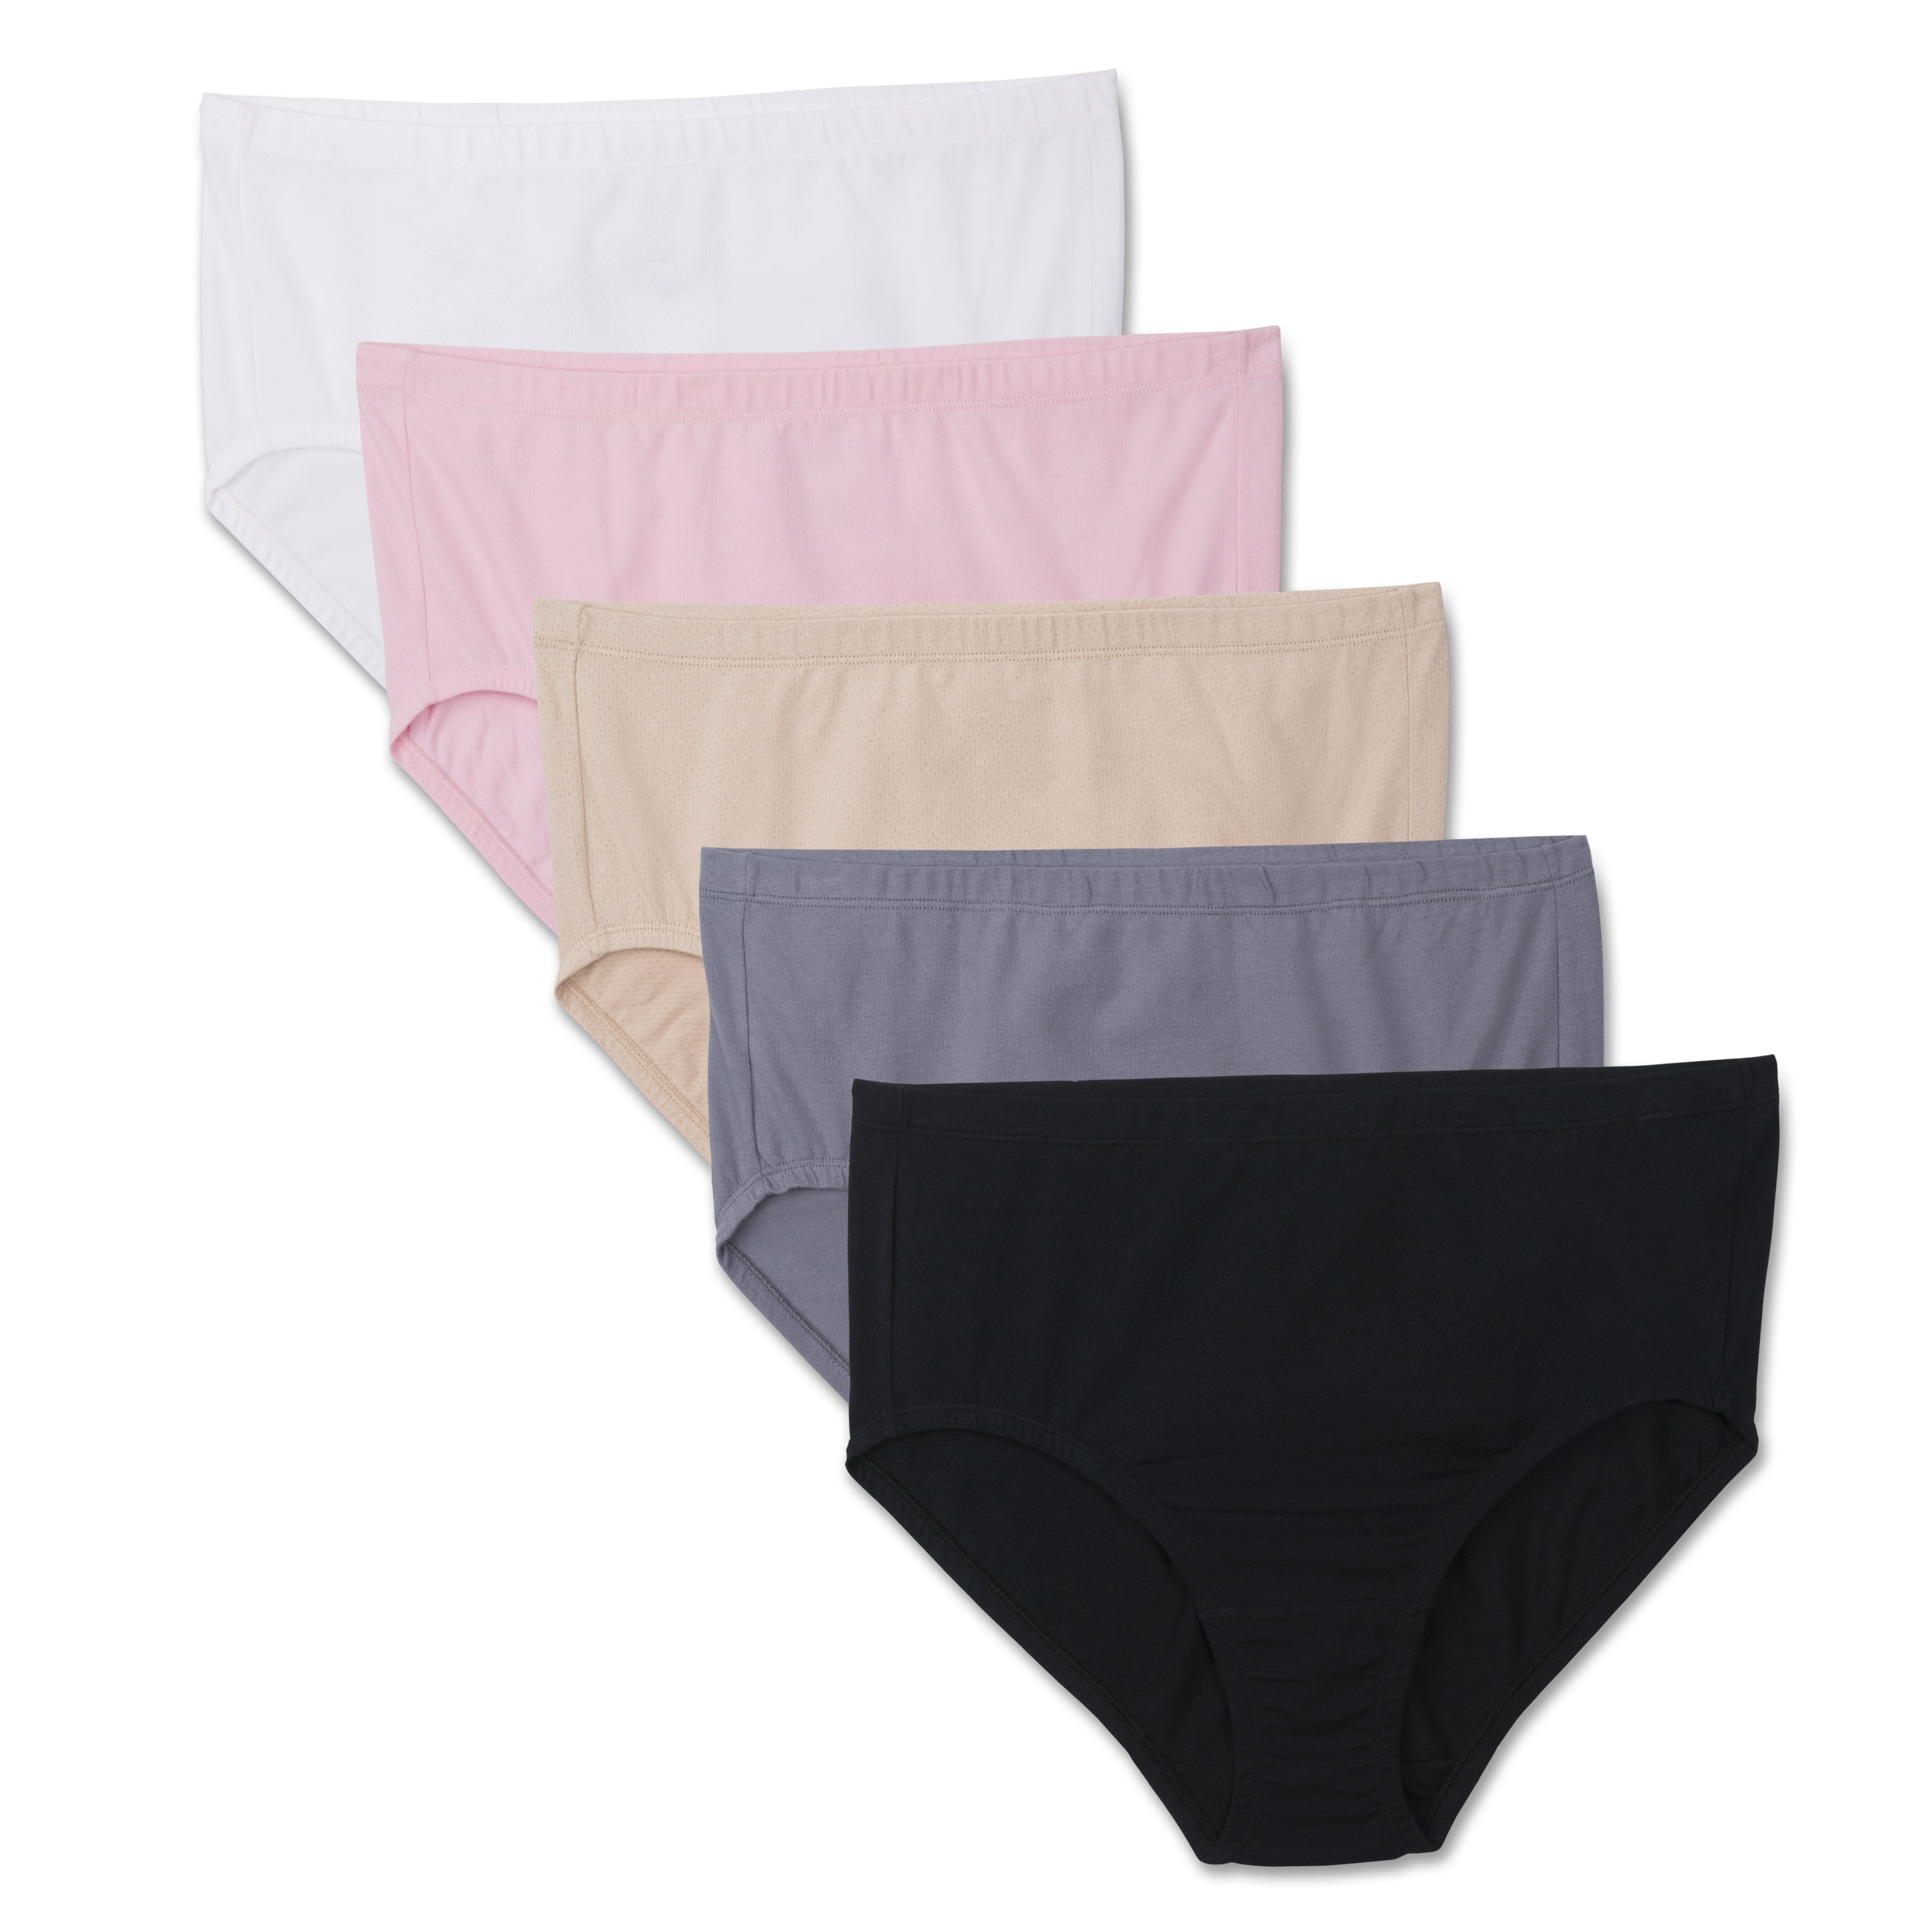  Fruit Of The Loom Womens Breathable Underwear, Moisture  Wicking Keeps You Cool & Comfortable, Available Size, Micro Mesh Hipster-10  Pack-Cream/Black/Grey, 13 Plus